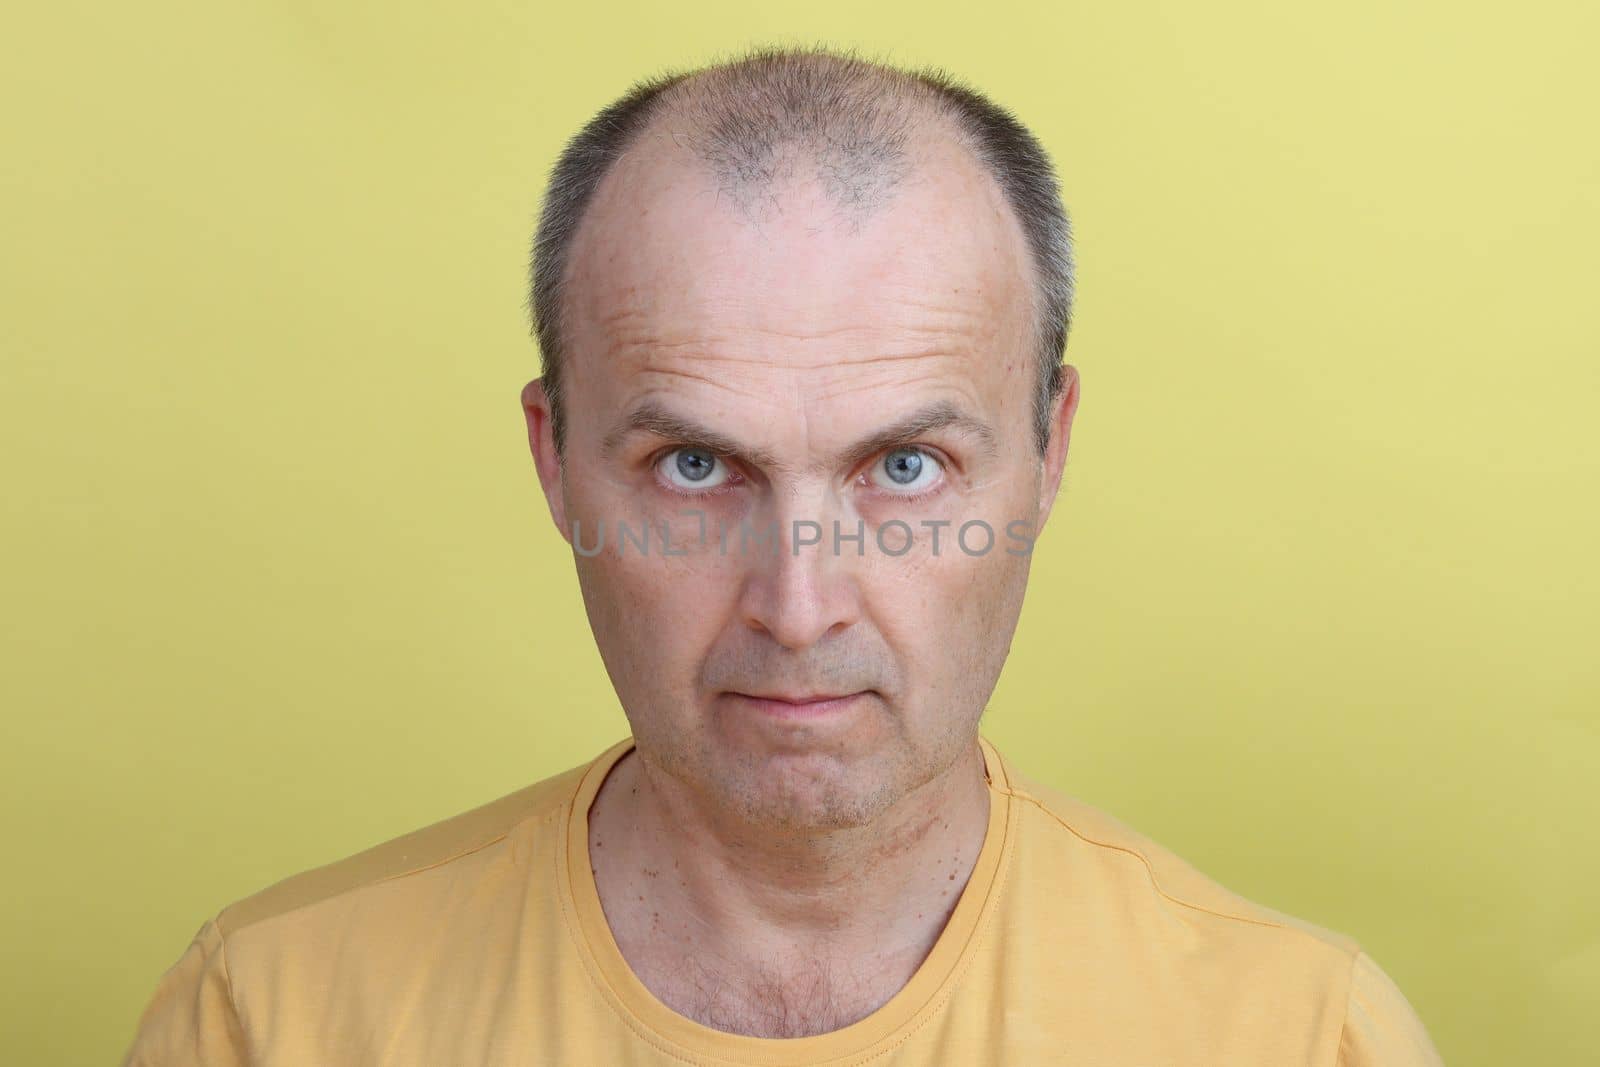 Attractive man in yellow T-shirt on yellow background looking into camera.